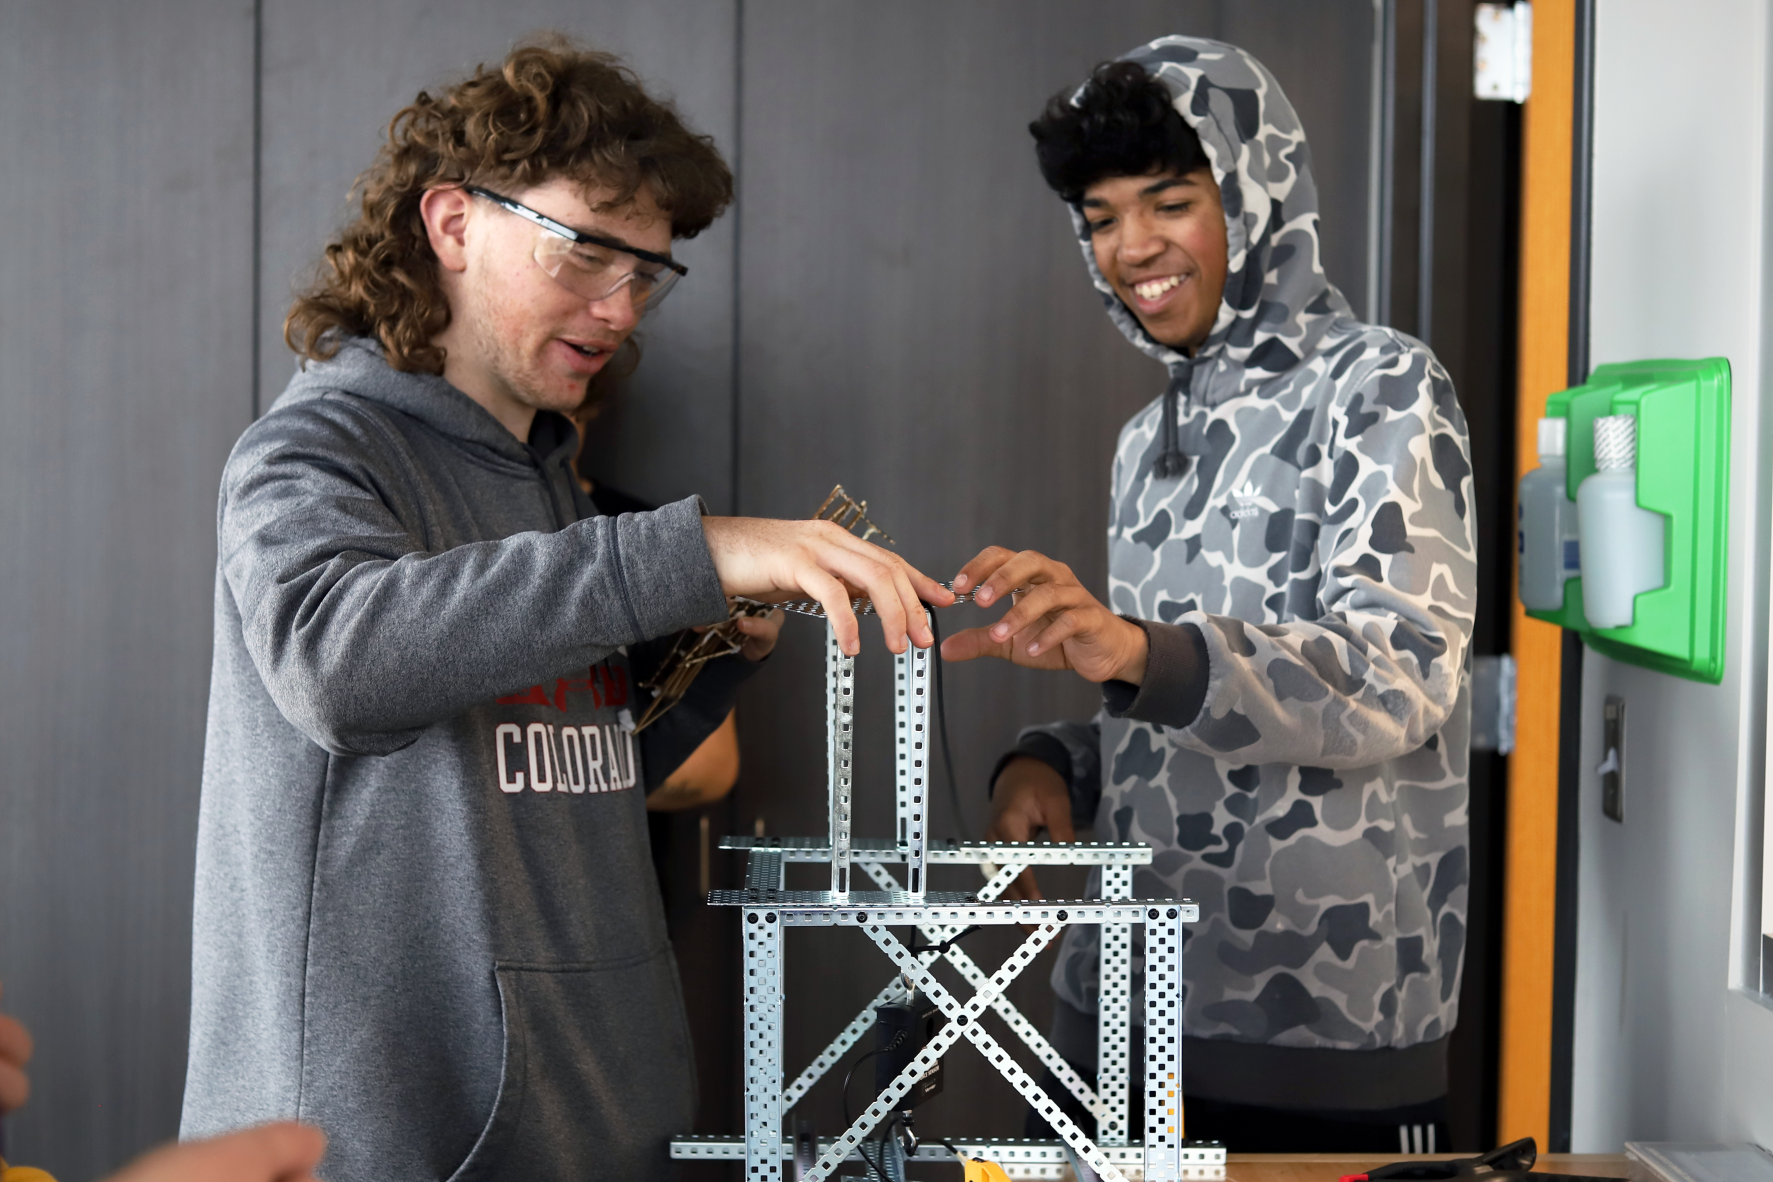 Two CPHS Students working on engineering project